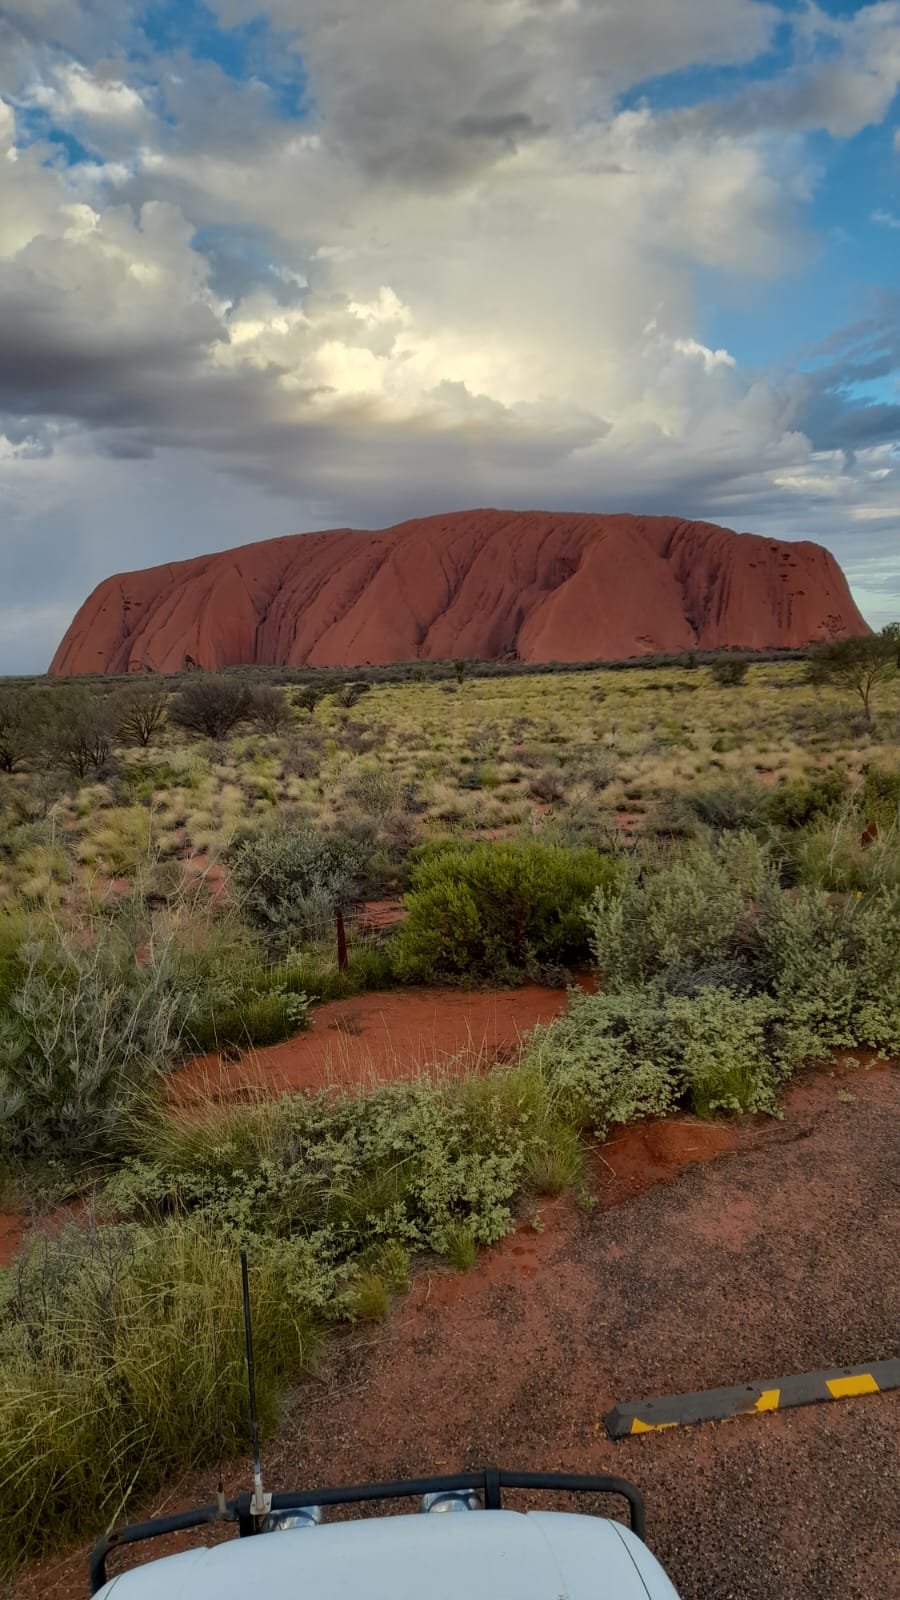 A picture of Uluru taken from a distance.